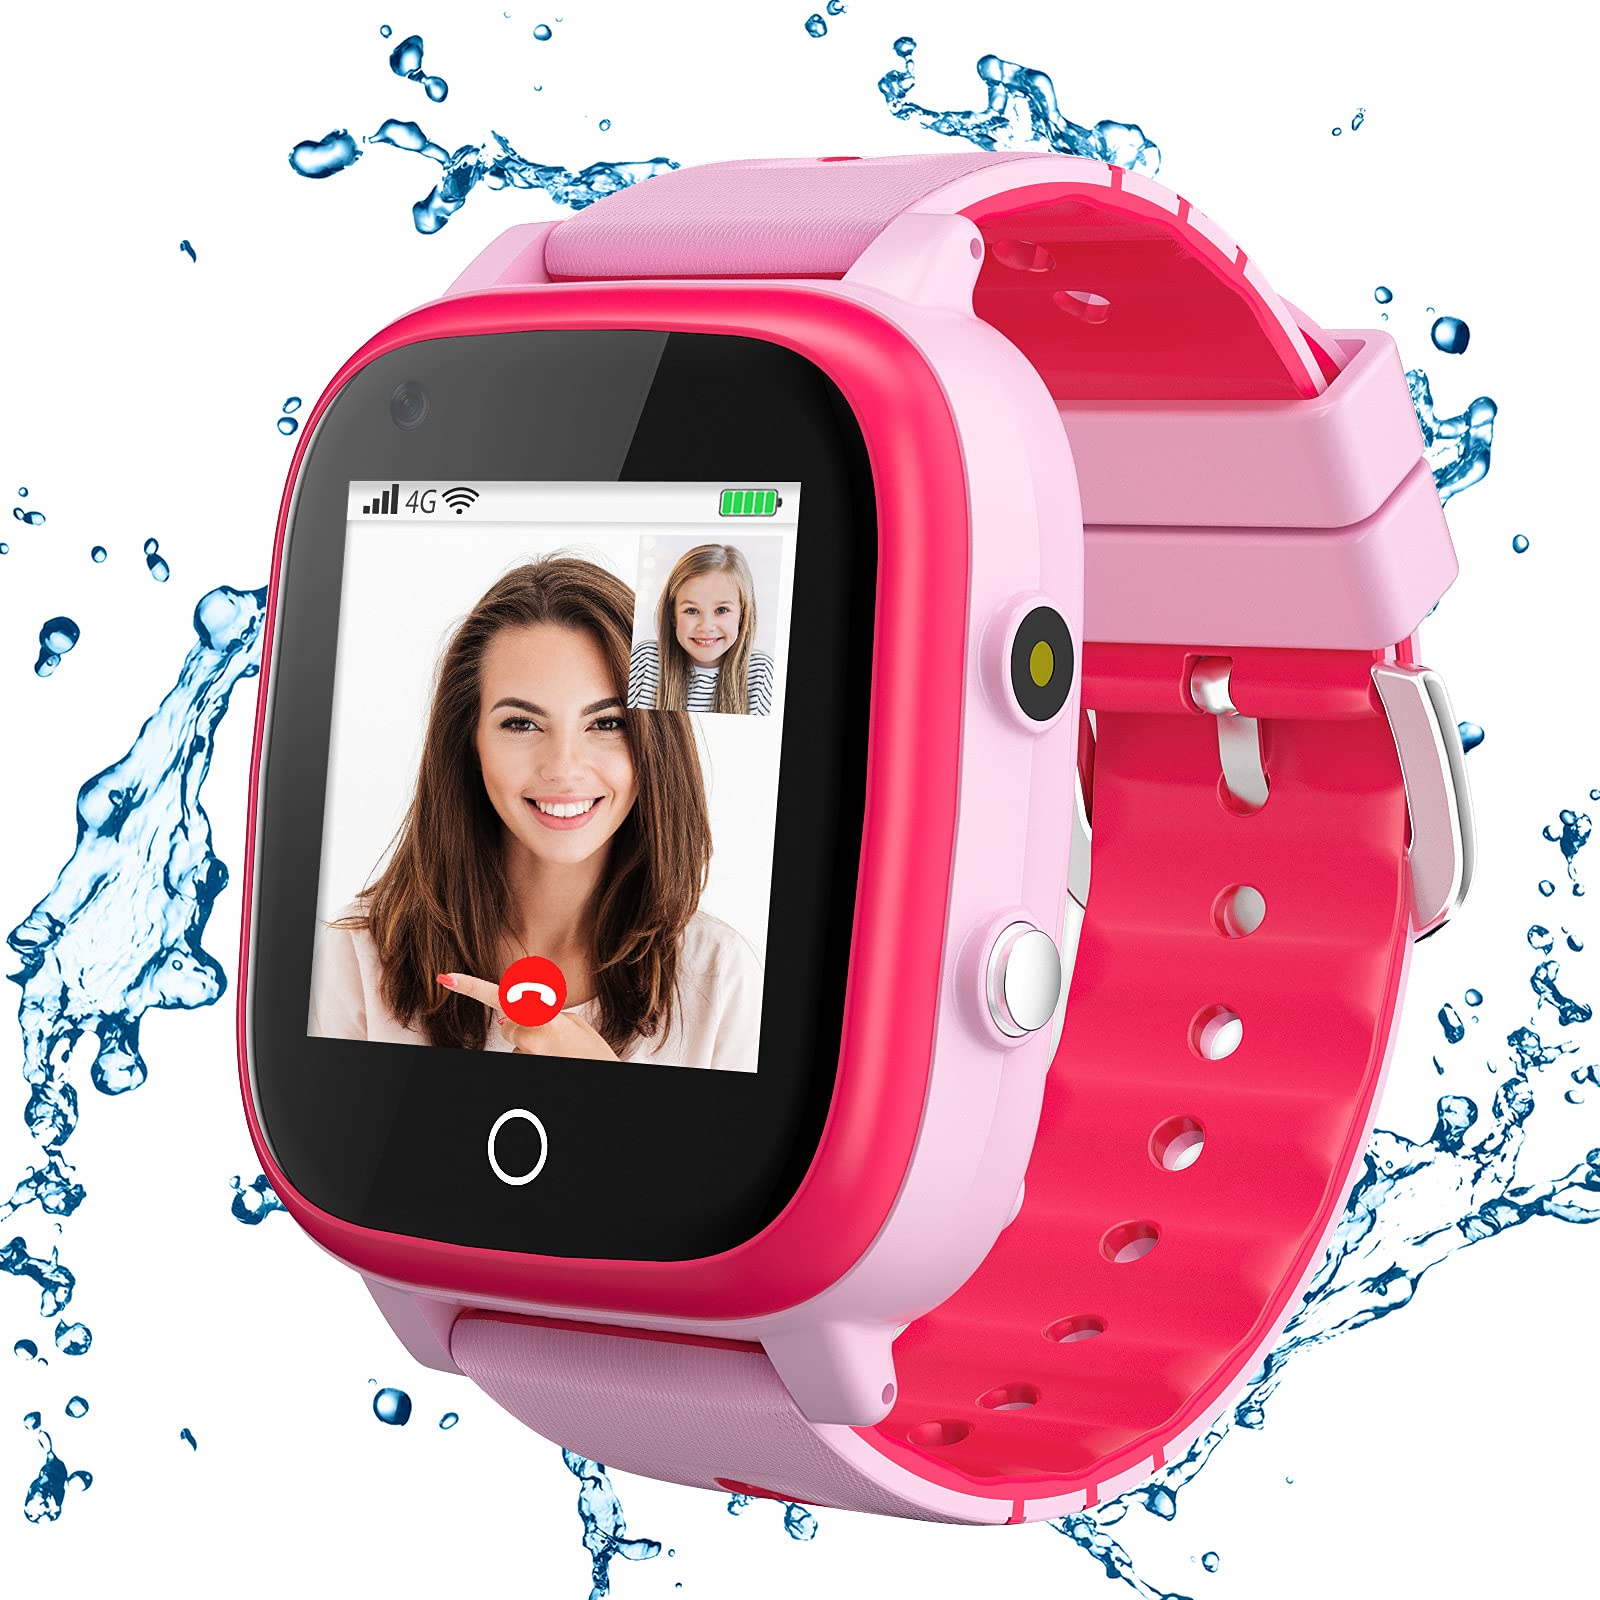 cjc 4G Kids Smart Watch, Smartwatch with GPS Tracker SOS Camera Voice & Video Call, HD Touch Screen Kid Watch Phone, Birthday for Age 3-15 Boys Girls (Red)